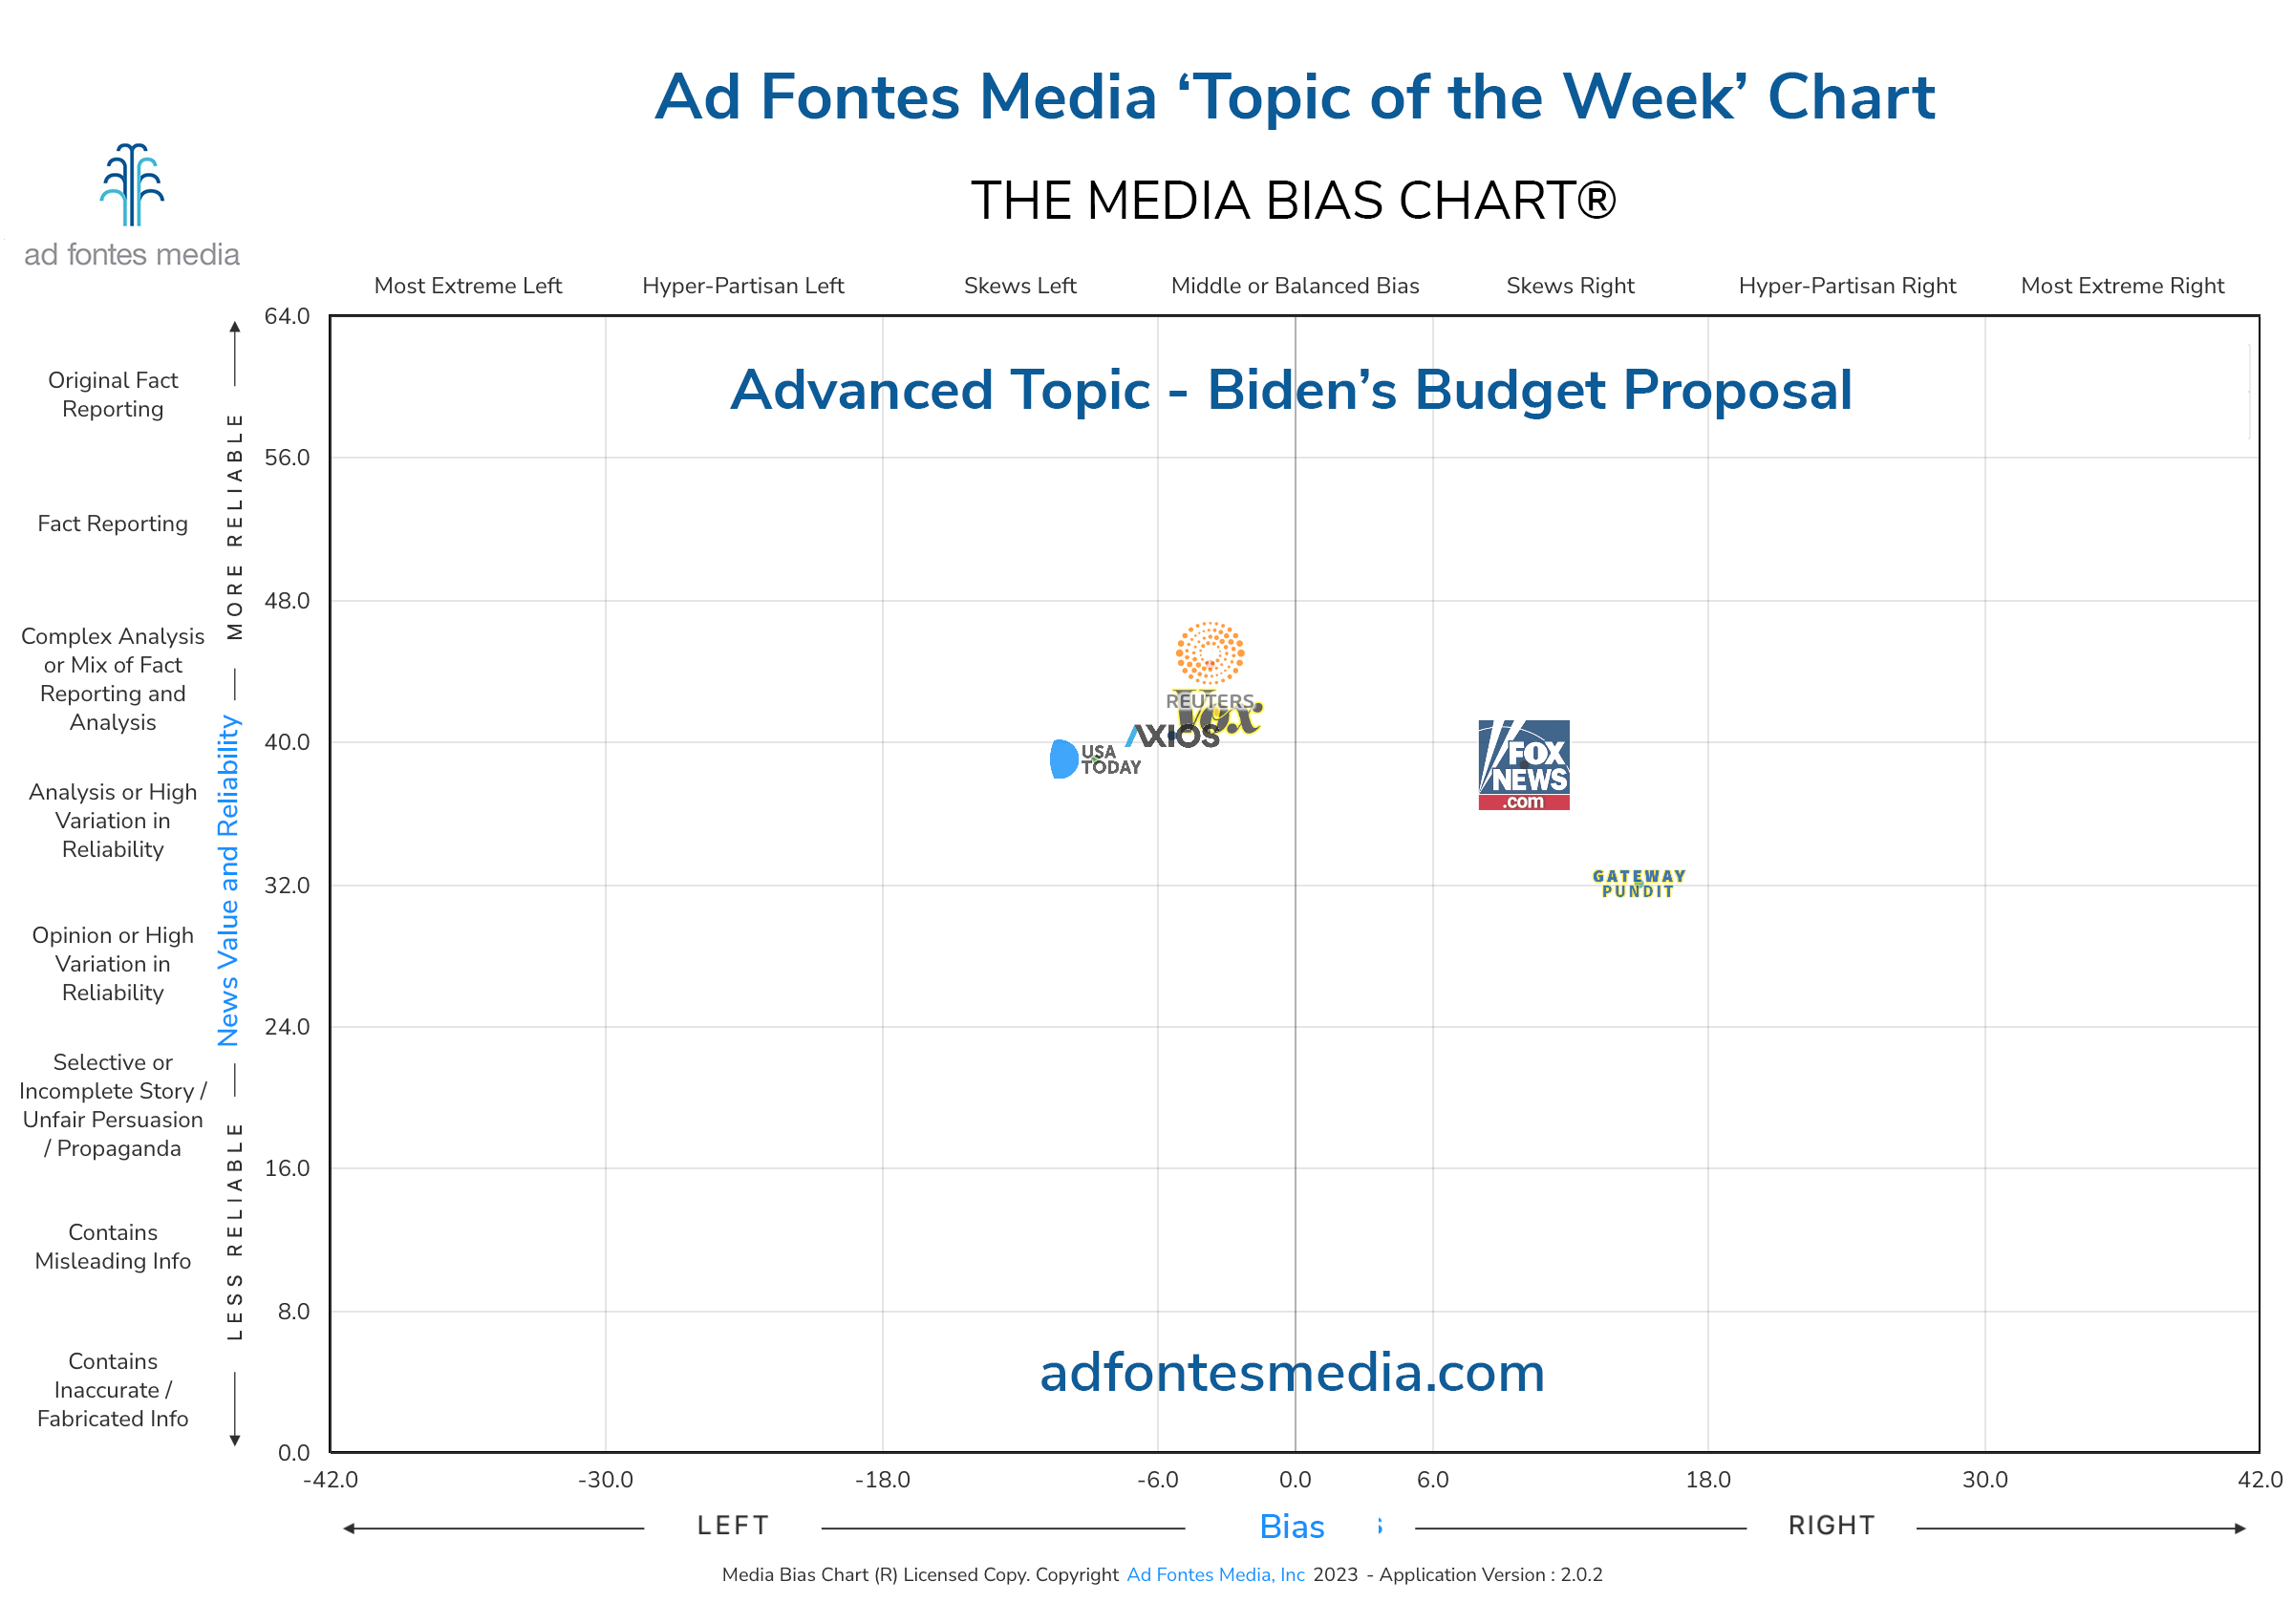 Scores of the Biden’s Budget Proposal articles on the chart